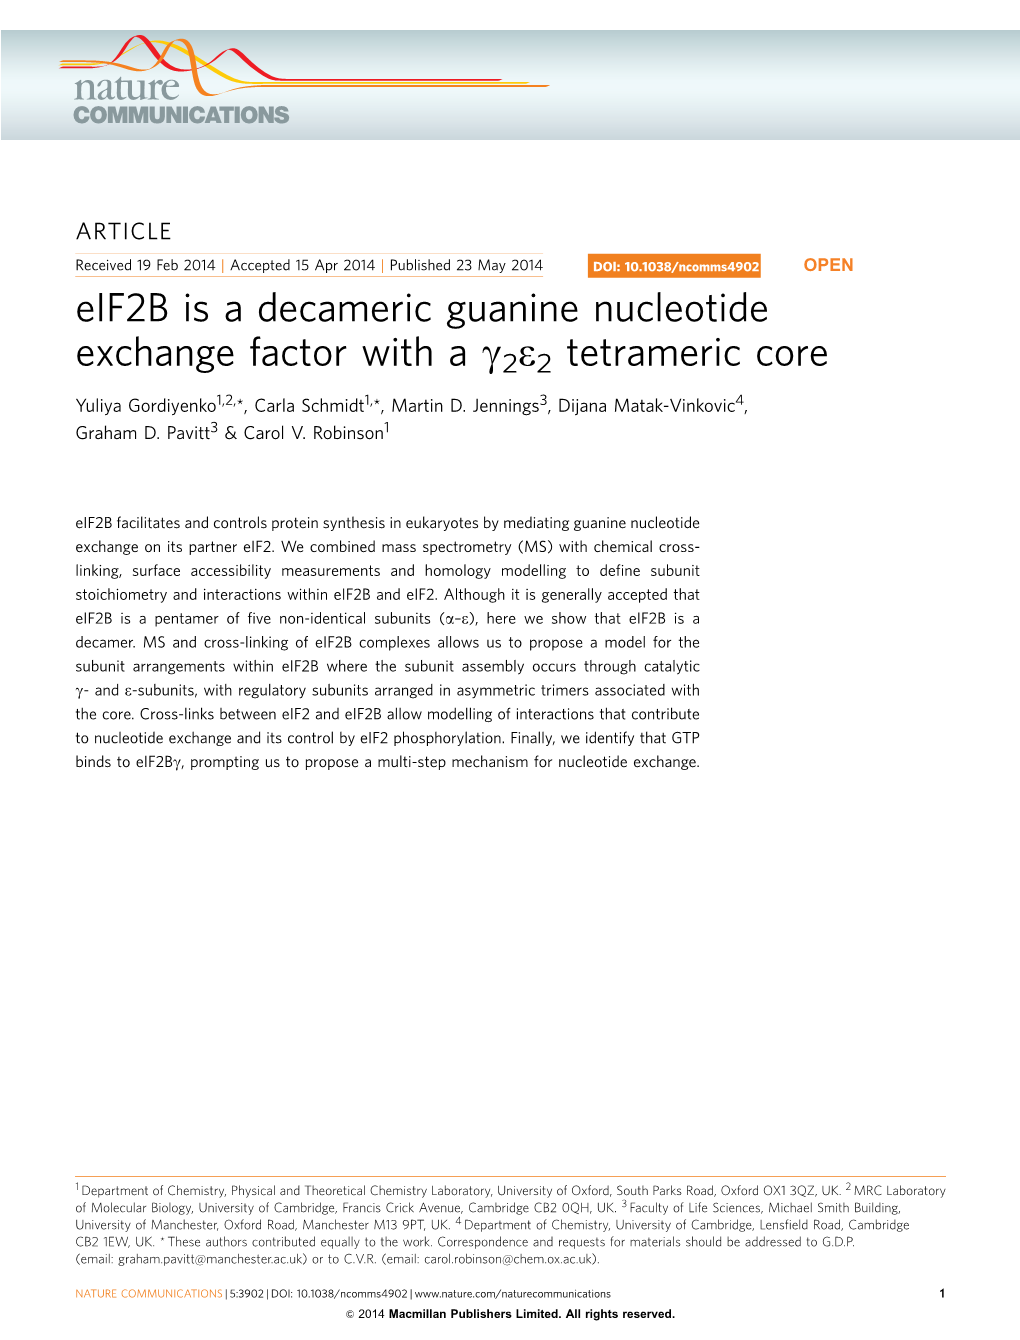 Eif2b Is a Decameric Guanine Nucleotide Exchange Factor with a G2e2 Tetrameric Core